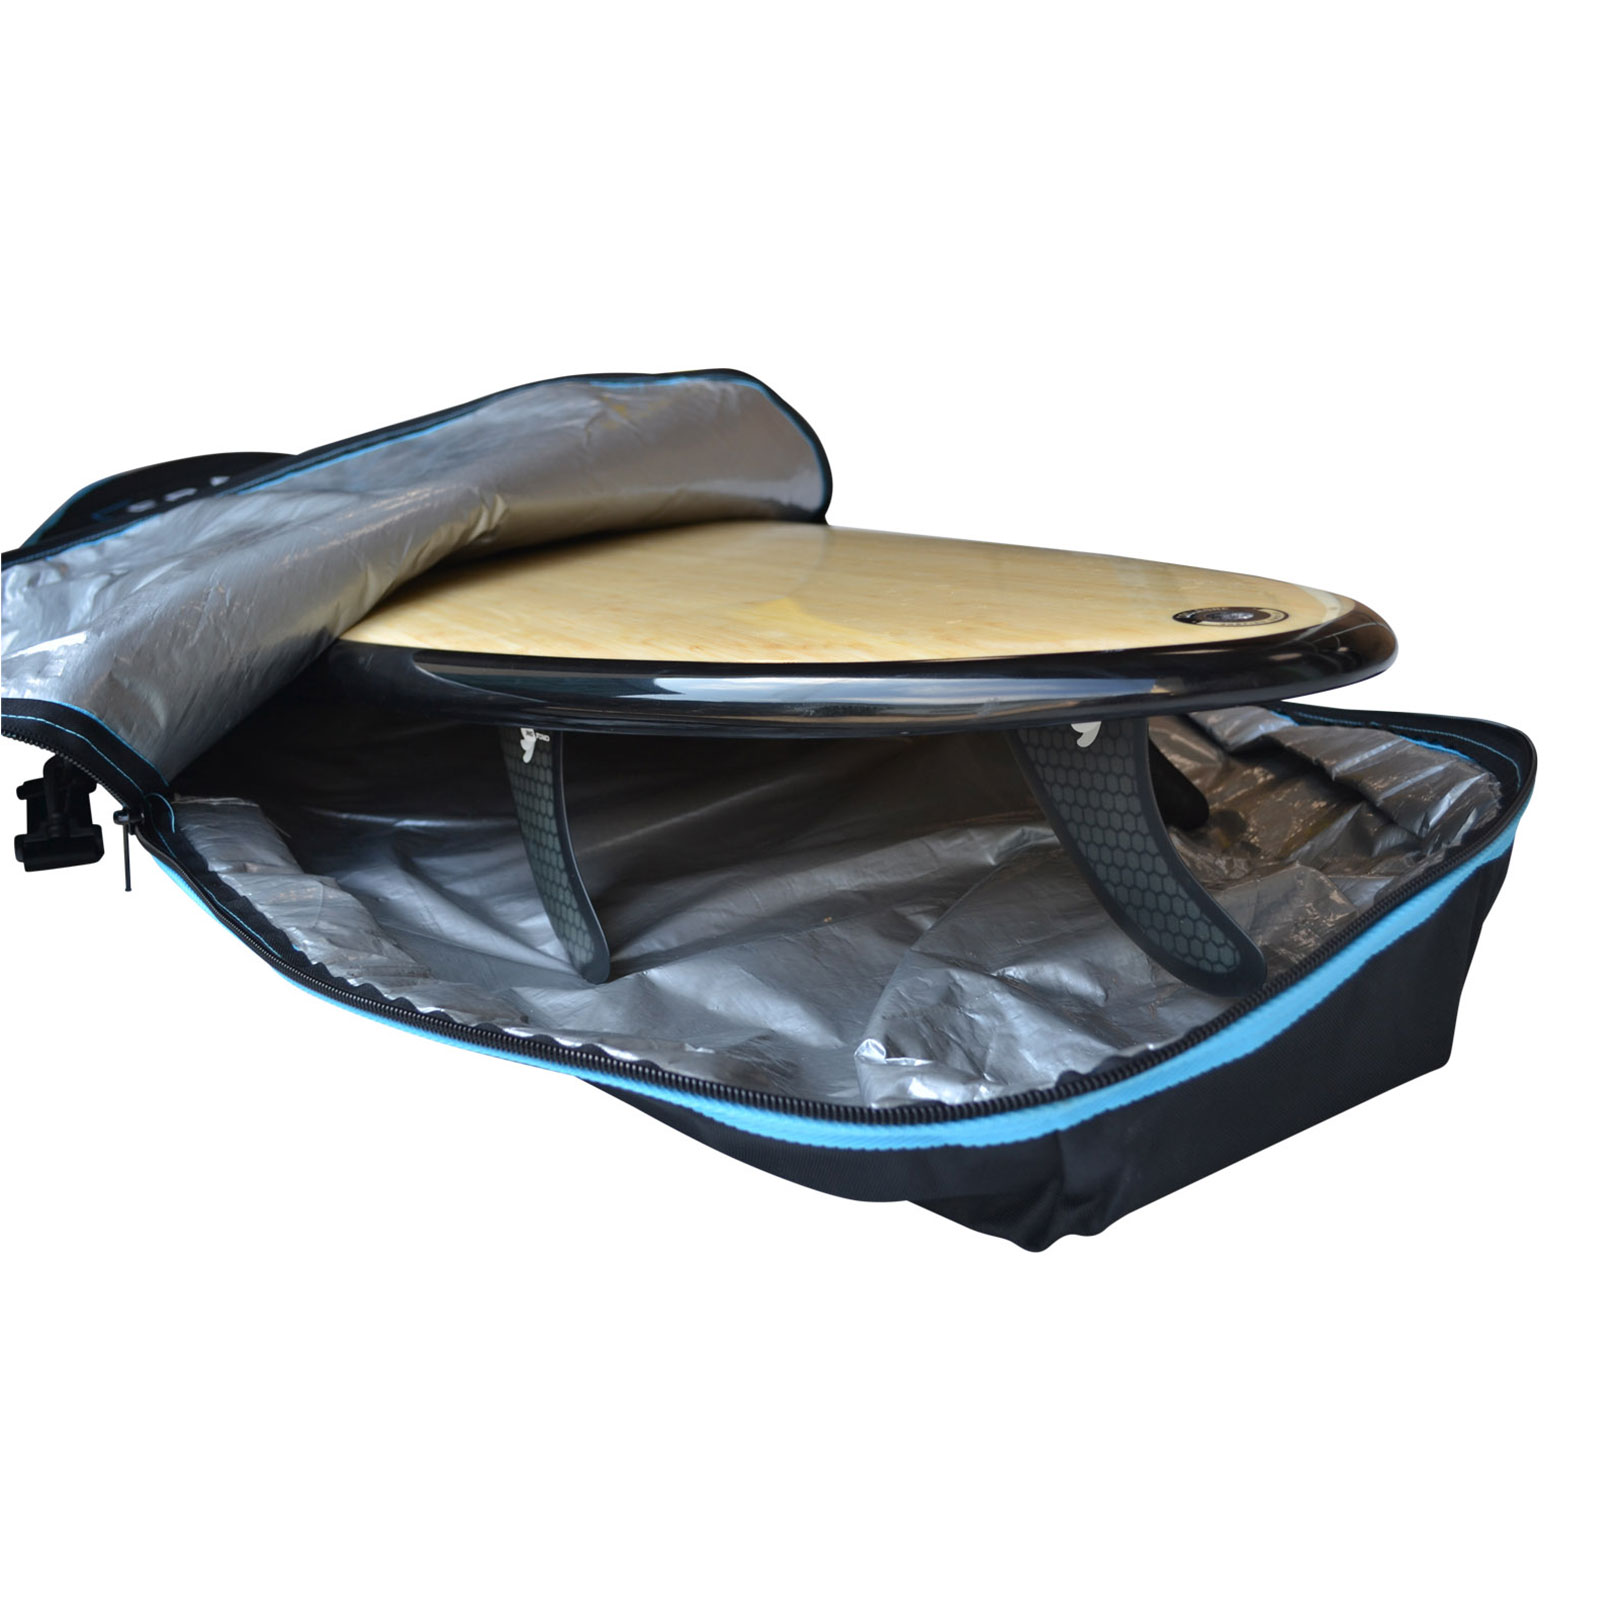 Surfboard Bag | Maximum Protection | Tough Outer Fabric